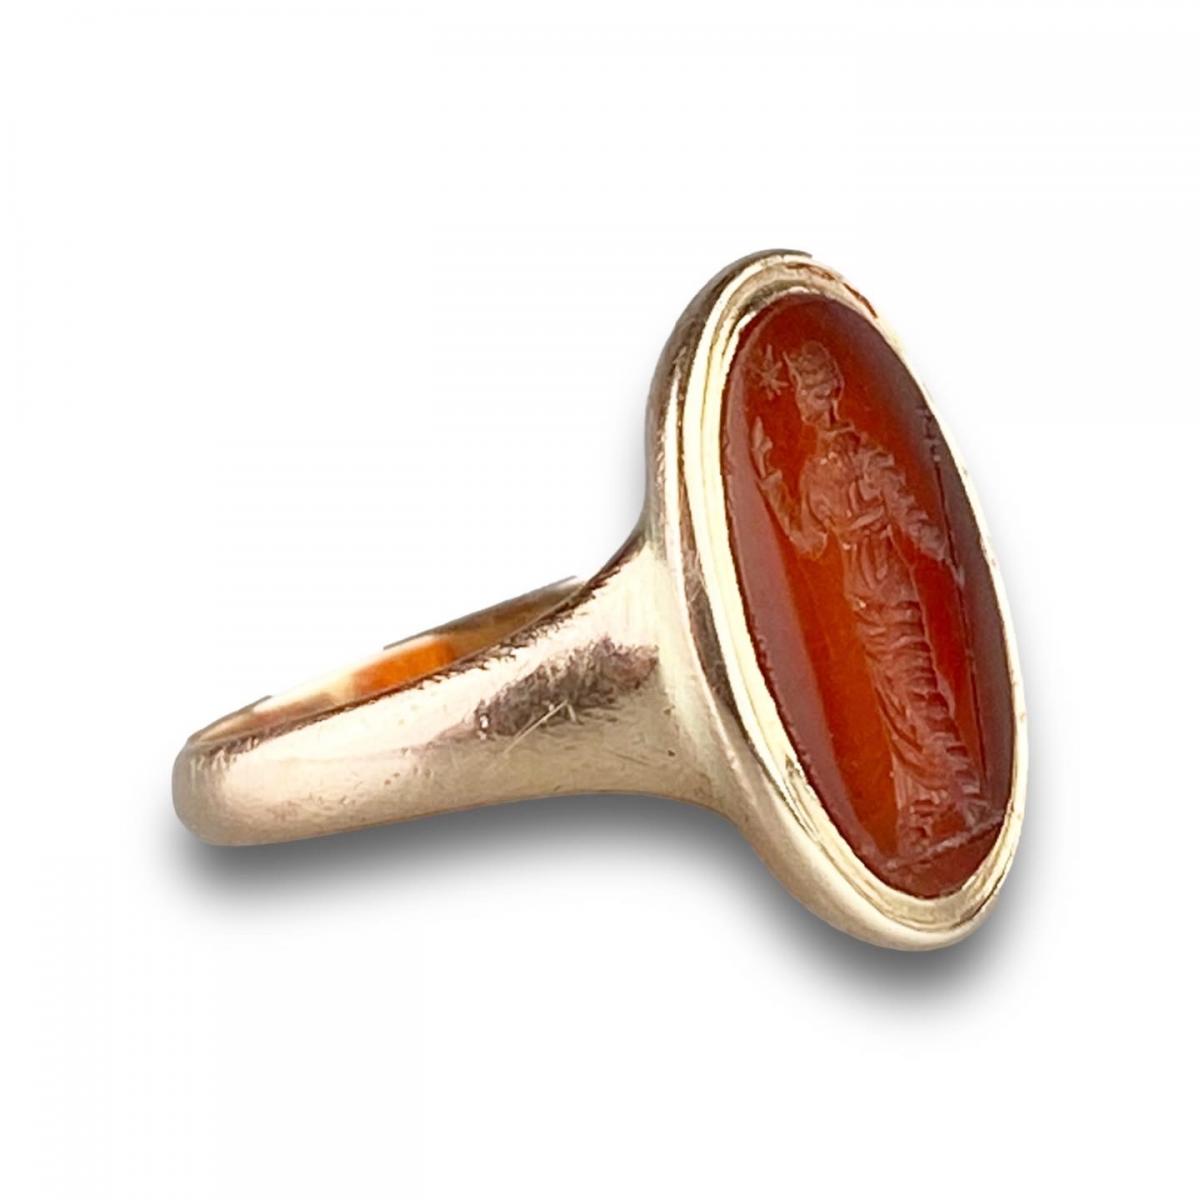 Gold ring with a carnelian intaglio of a woman. Italian, 18th-19th centuries